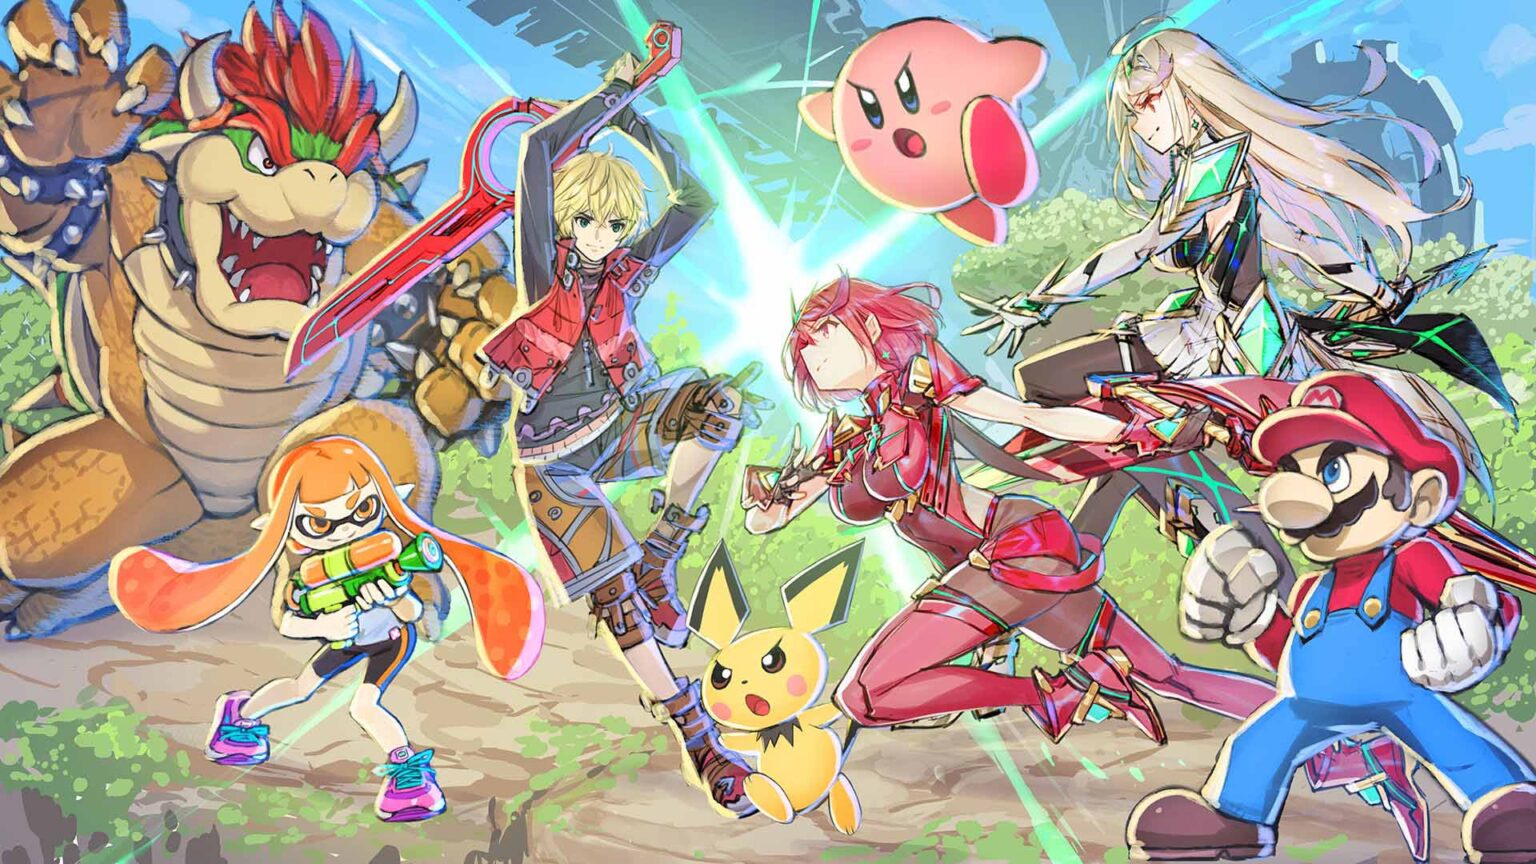 Why on earth did Nintendo choose Pyra to be the next 'Super Smash Bros.' fighter? Sigh at the redundant anime swordfighter with these salty 'Smash' memes .